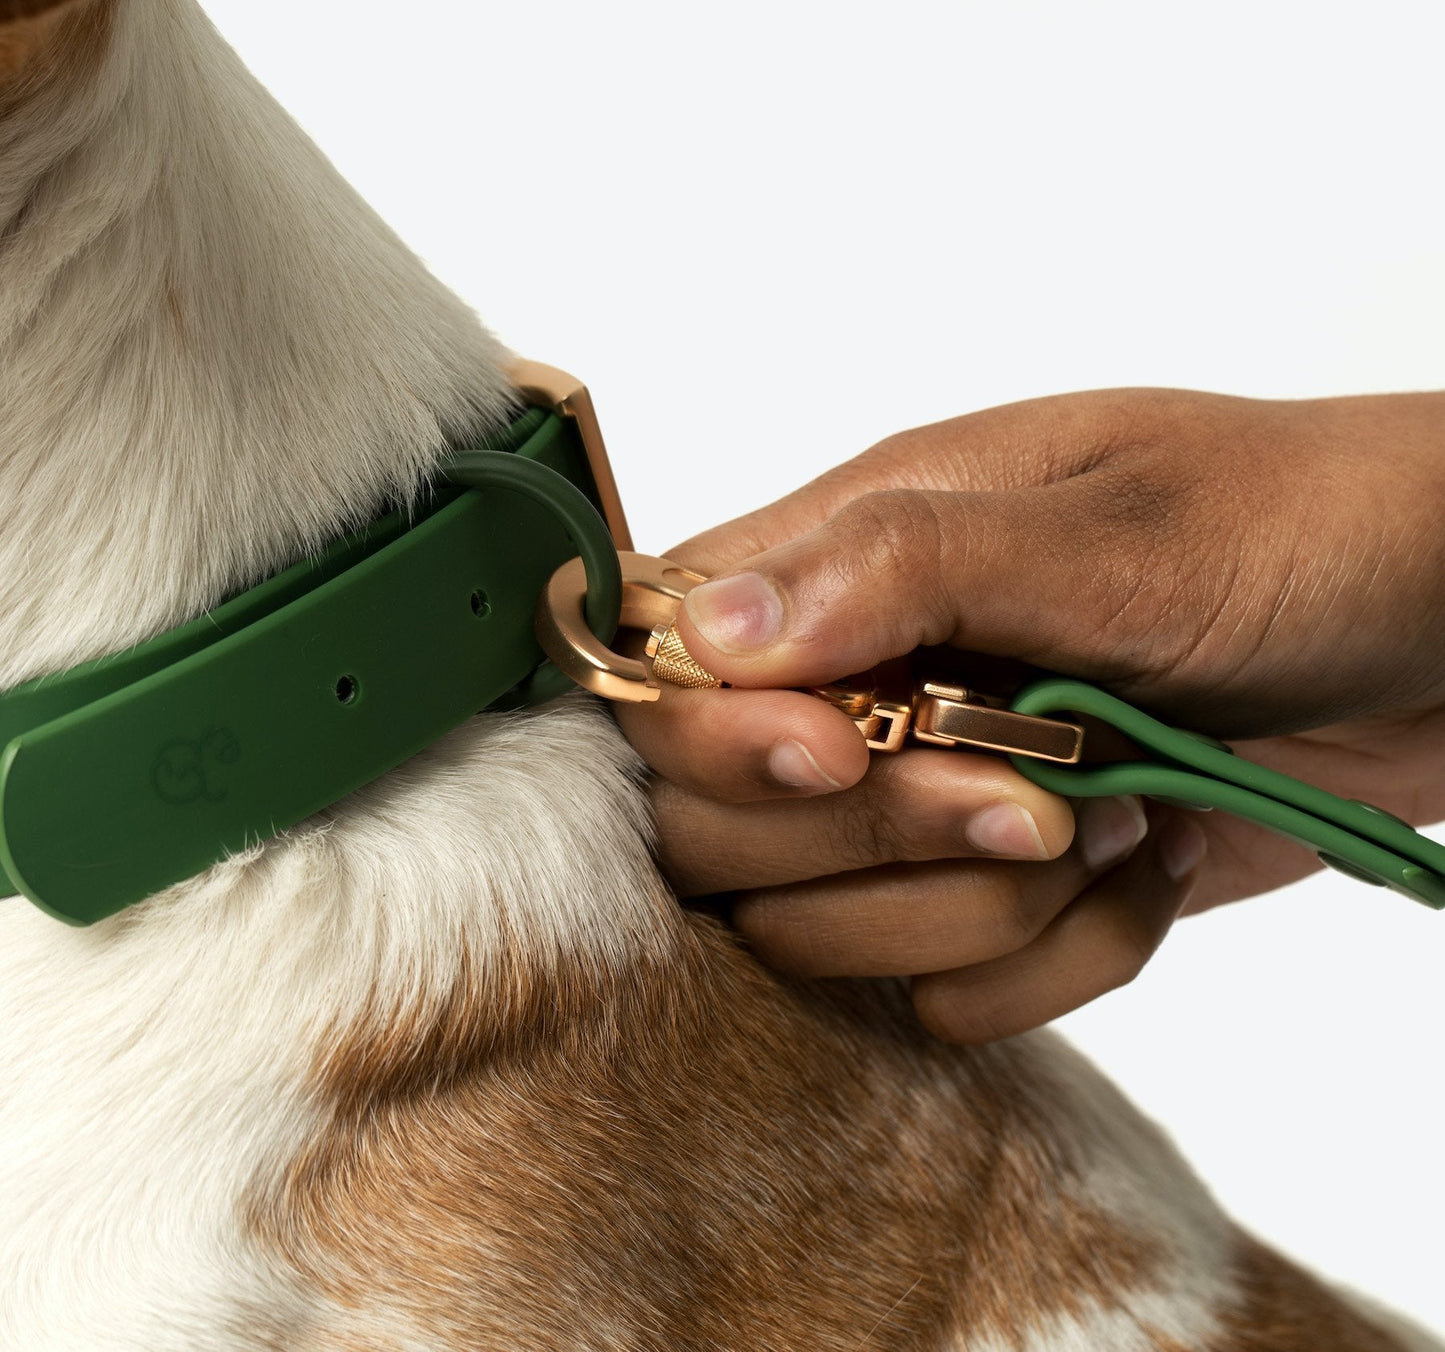 Water-proof, easy to clean, PVC/biothane dog collar by Lucy & Co.